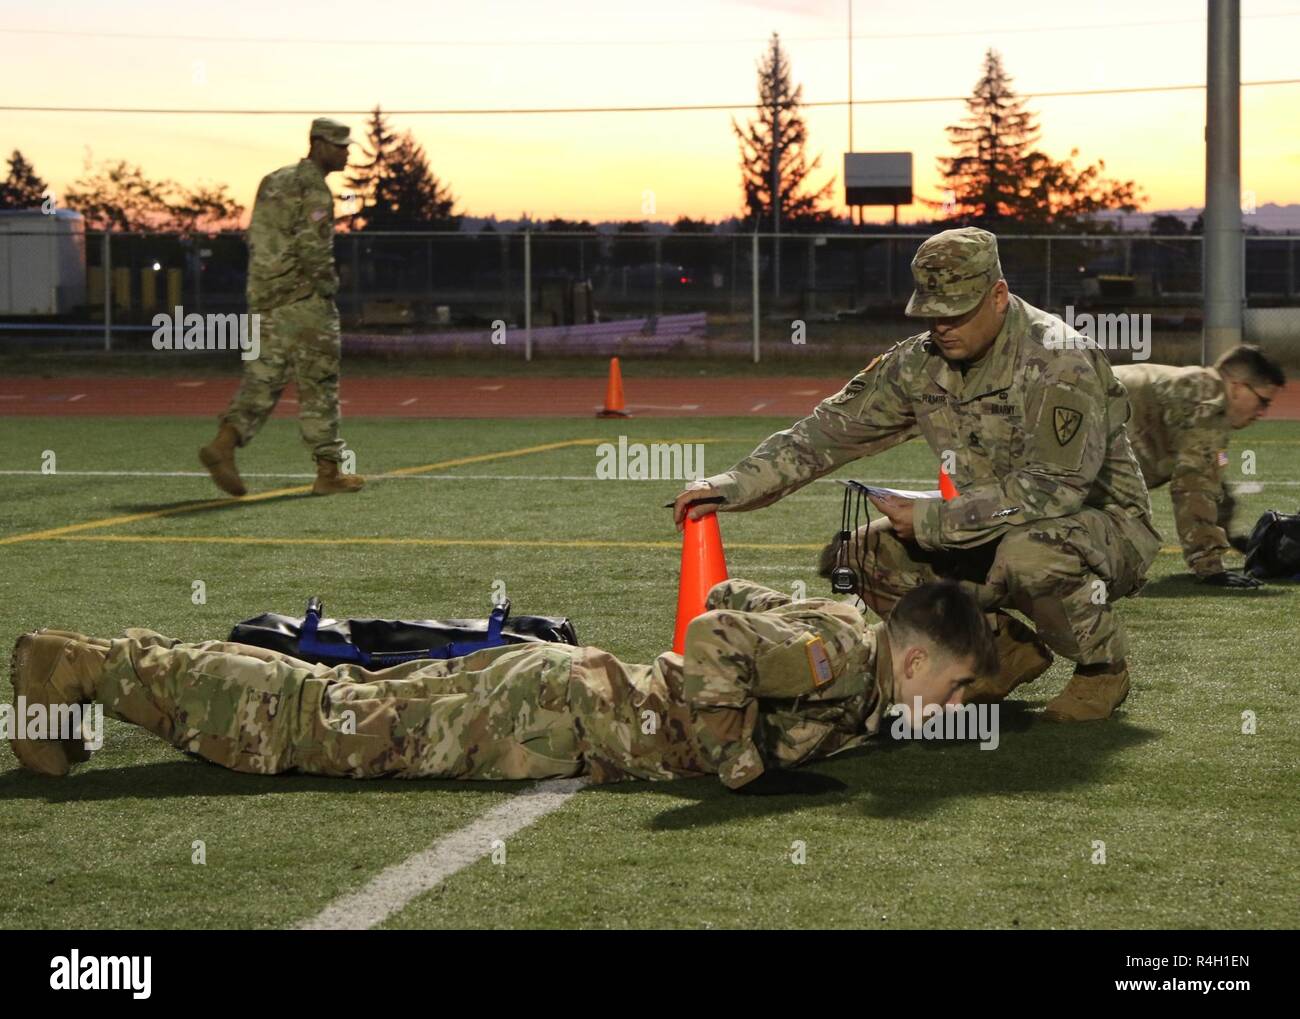 Sgt. 1st Class Luis Ramirez, an operations NCO with 42nd Military Police Brigade, grades a competitor on hand release push-ups during the brigade's first quarter Soldier of the Quarter competition on Joint Base Lewis-McChord, Wash. Stock Photo